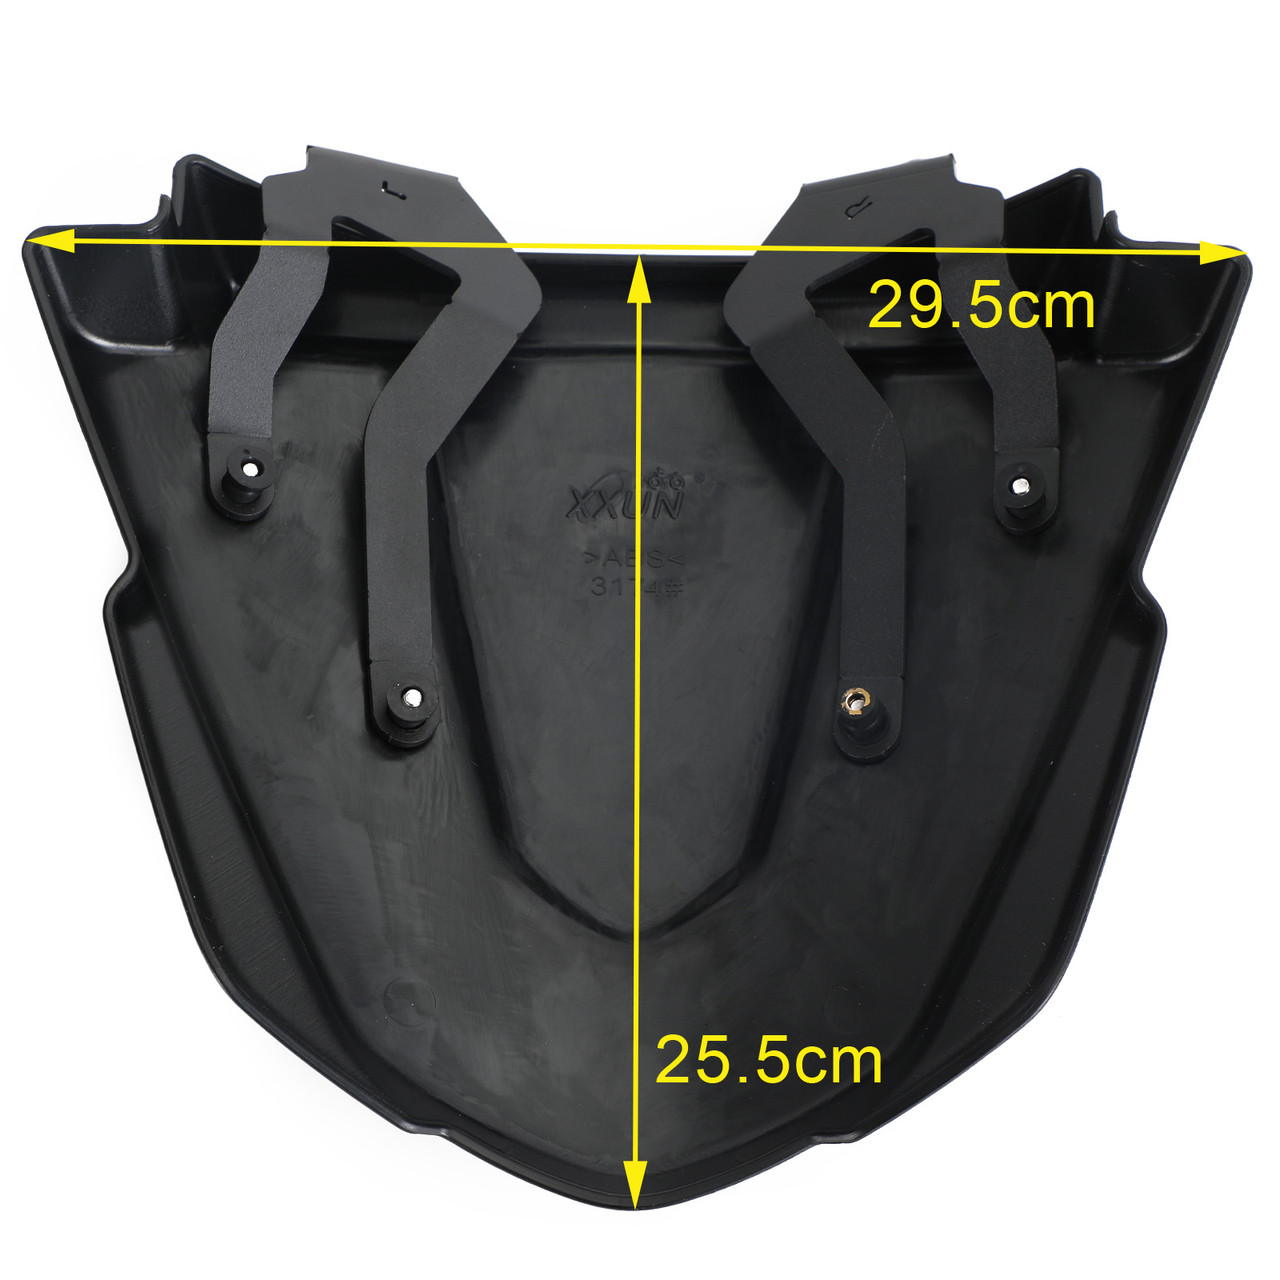 Mudguard Extension Cover Front Beak Nose Cone Fit For Yamaha XT1200Z 2014-2021 BLK